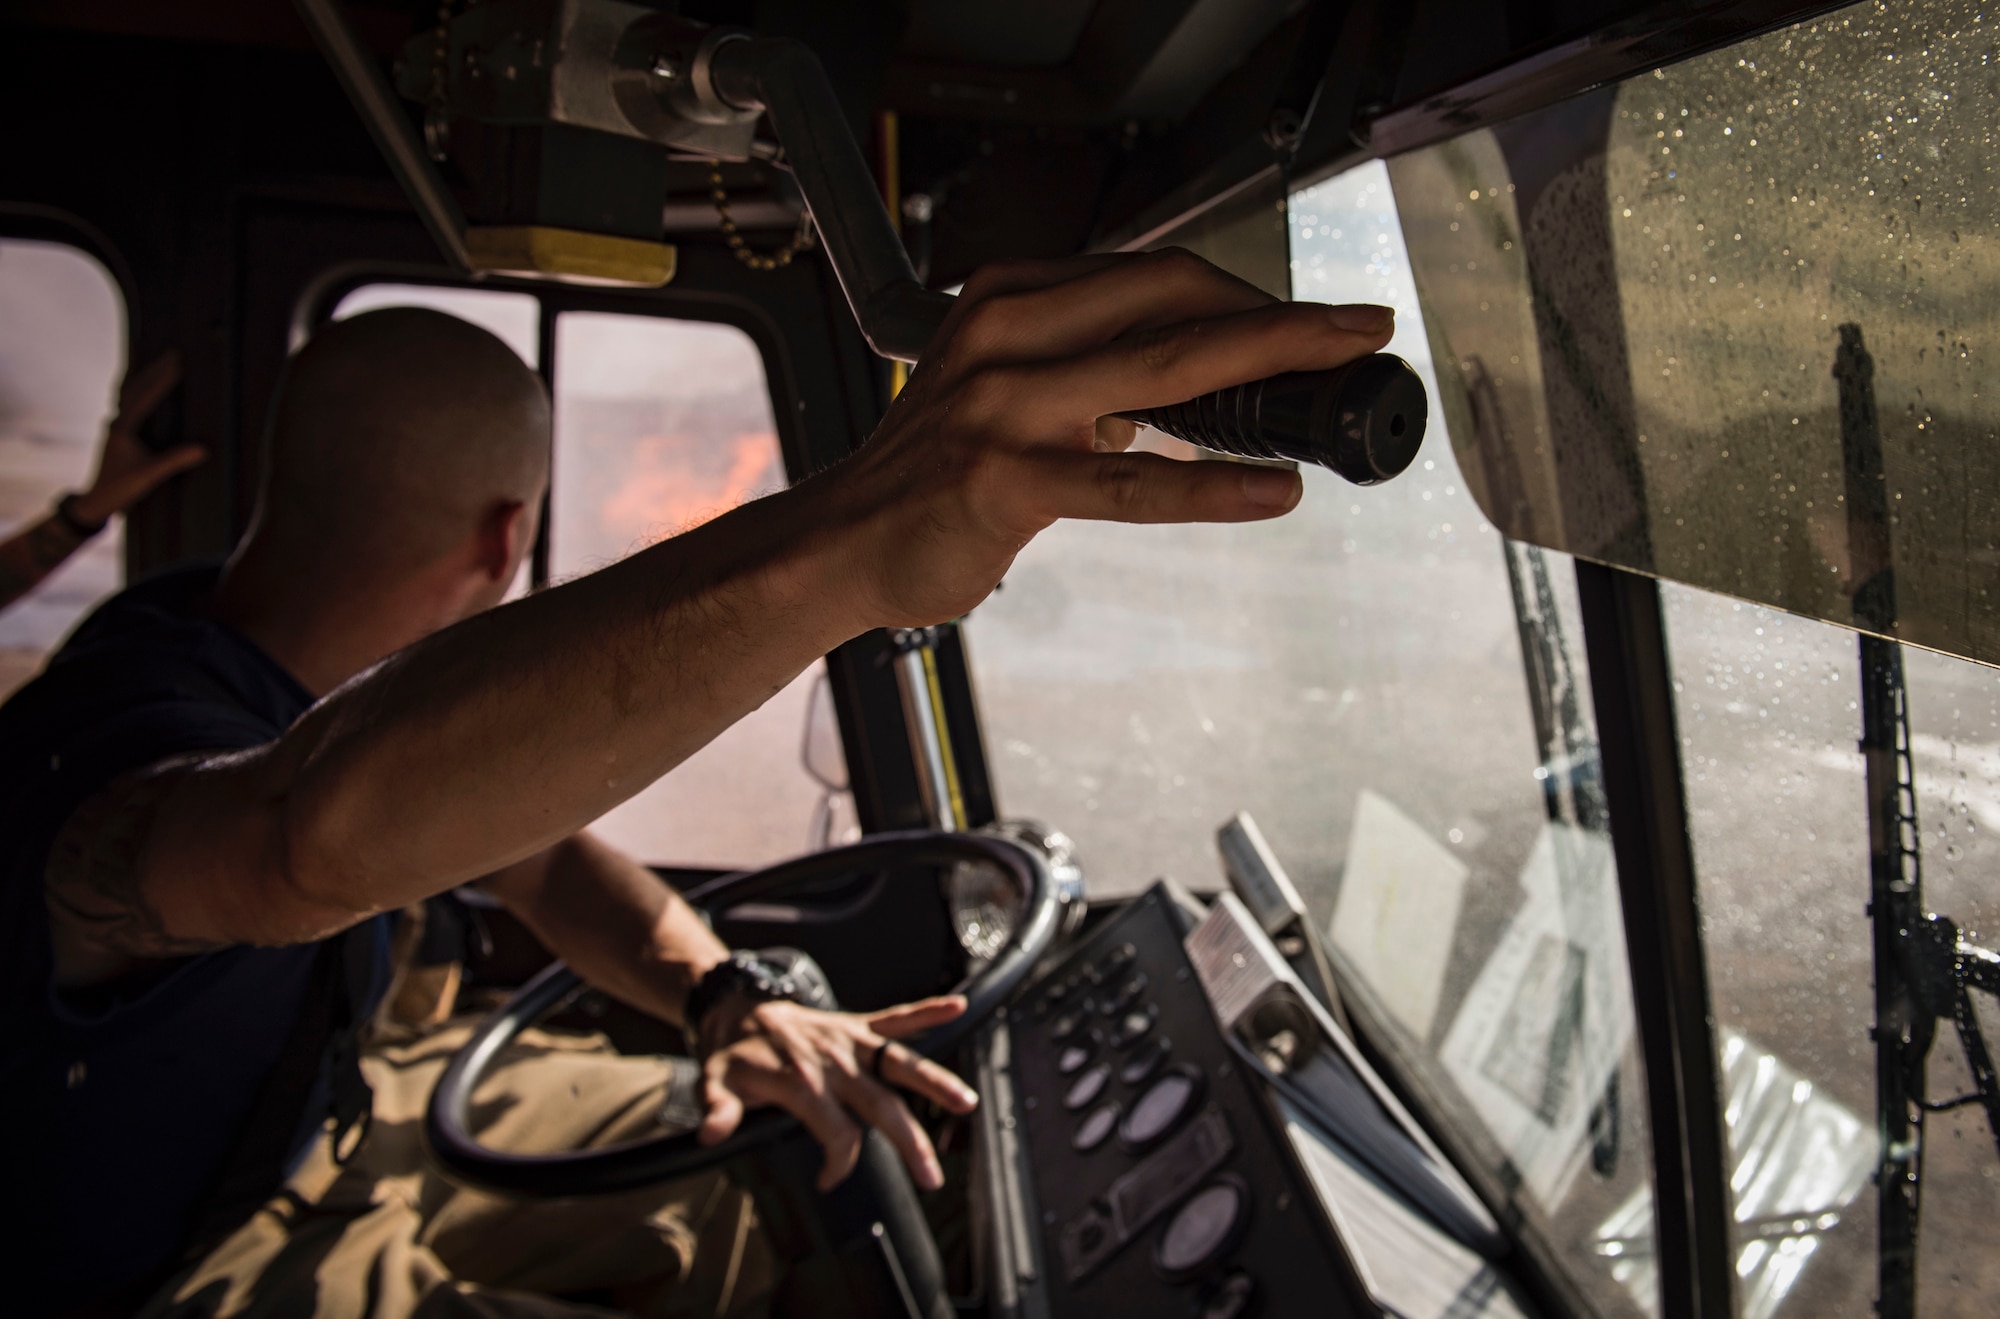 Airman 1st Class Matthew Trevizo, 99th Civil Engineer Squadron firefighter, maneuvers a water cannon on his fire truck towards a simulated aircraft fire during a training exercise Oct. 23, 2018, at Nellis Air Force Base, Nev. Trevizo was also responsible for driving the truck at the same time he operated the water cannon. (U.S. Air Force photo by Airman 1st Class Andrew D. Sarver)